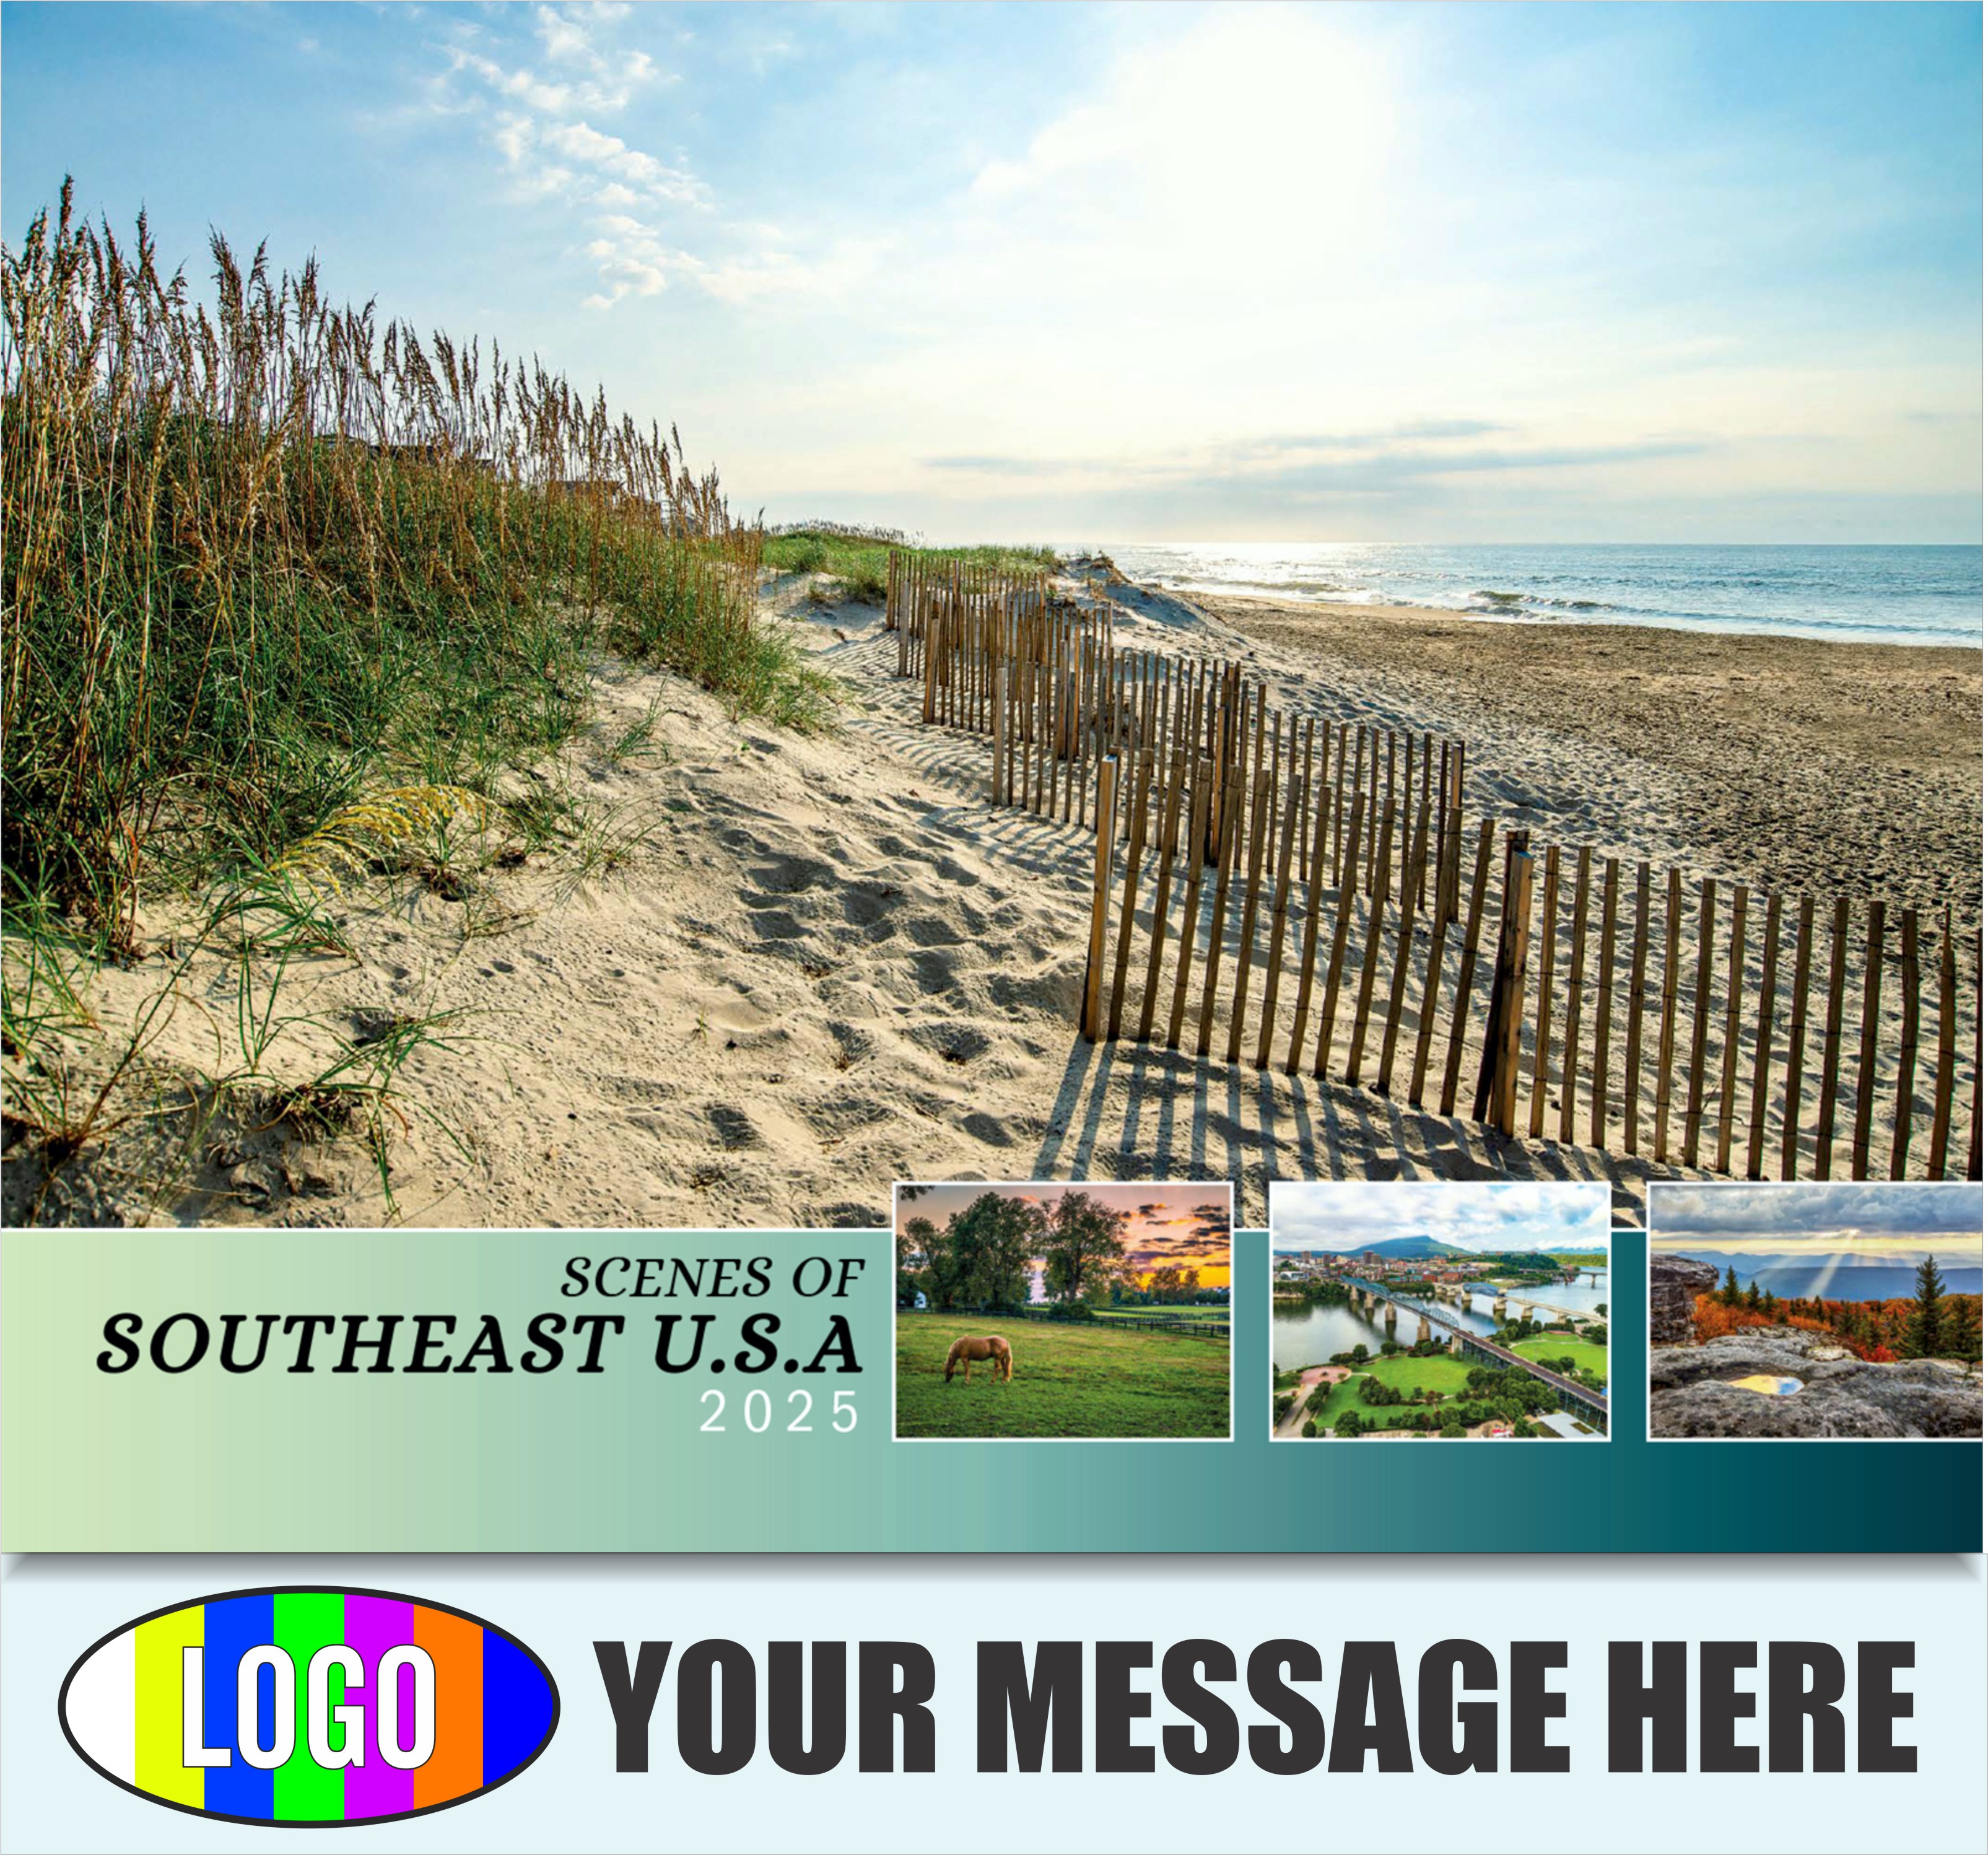 Scenes of Southeast USA 2025 Business Promo Wall Calendar - cover